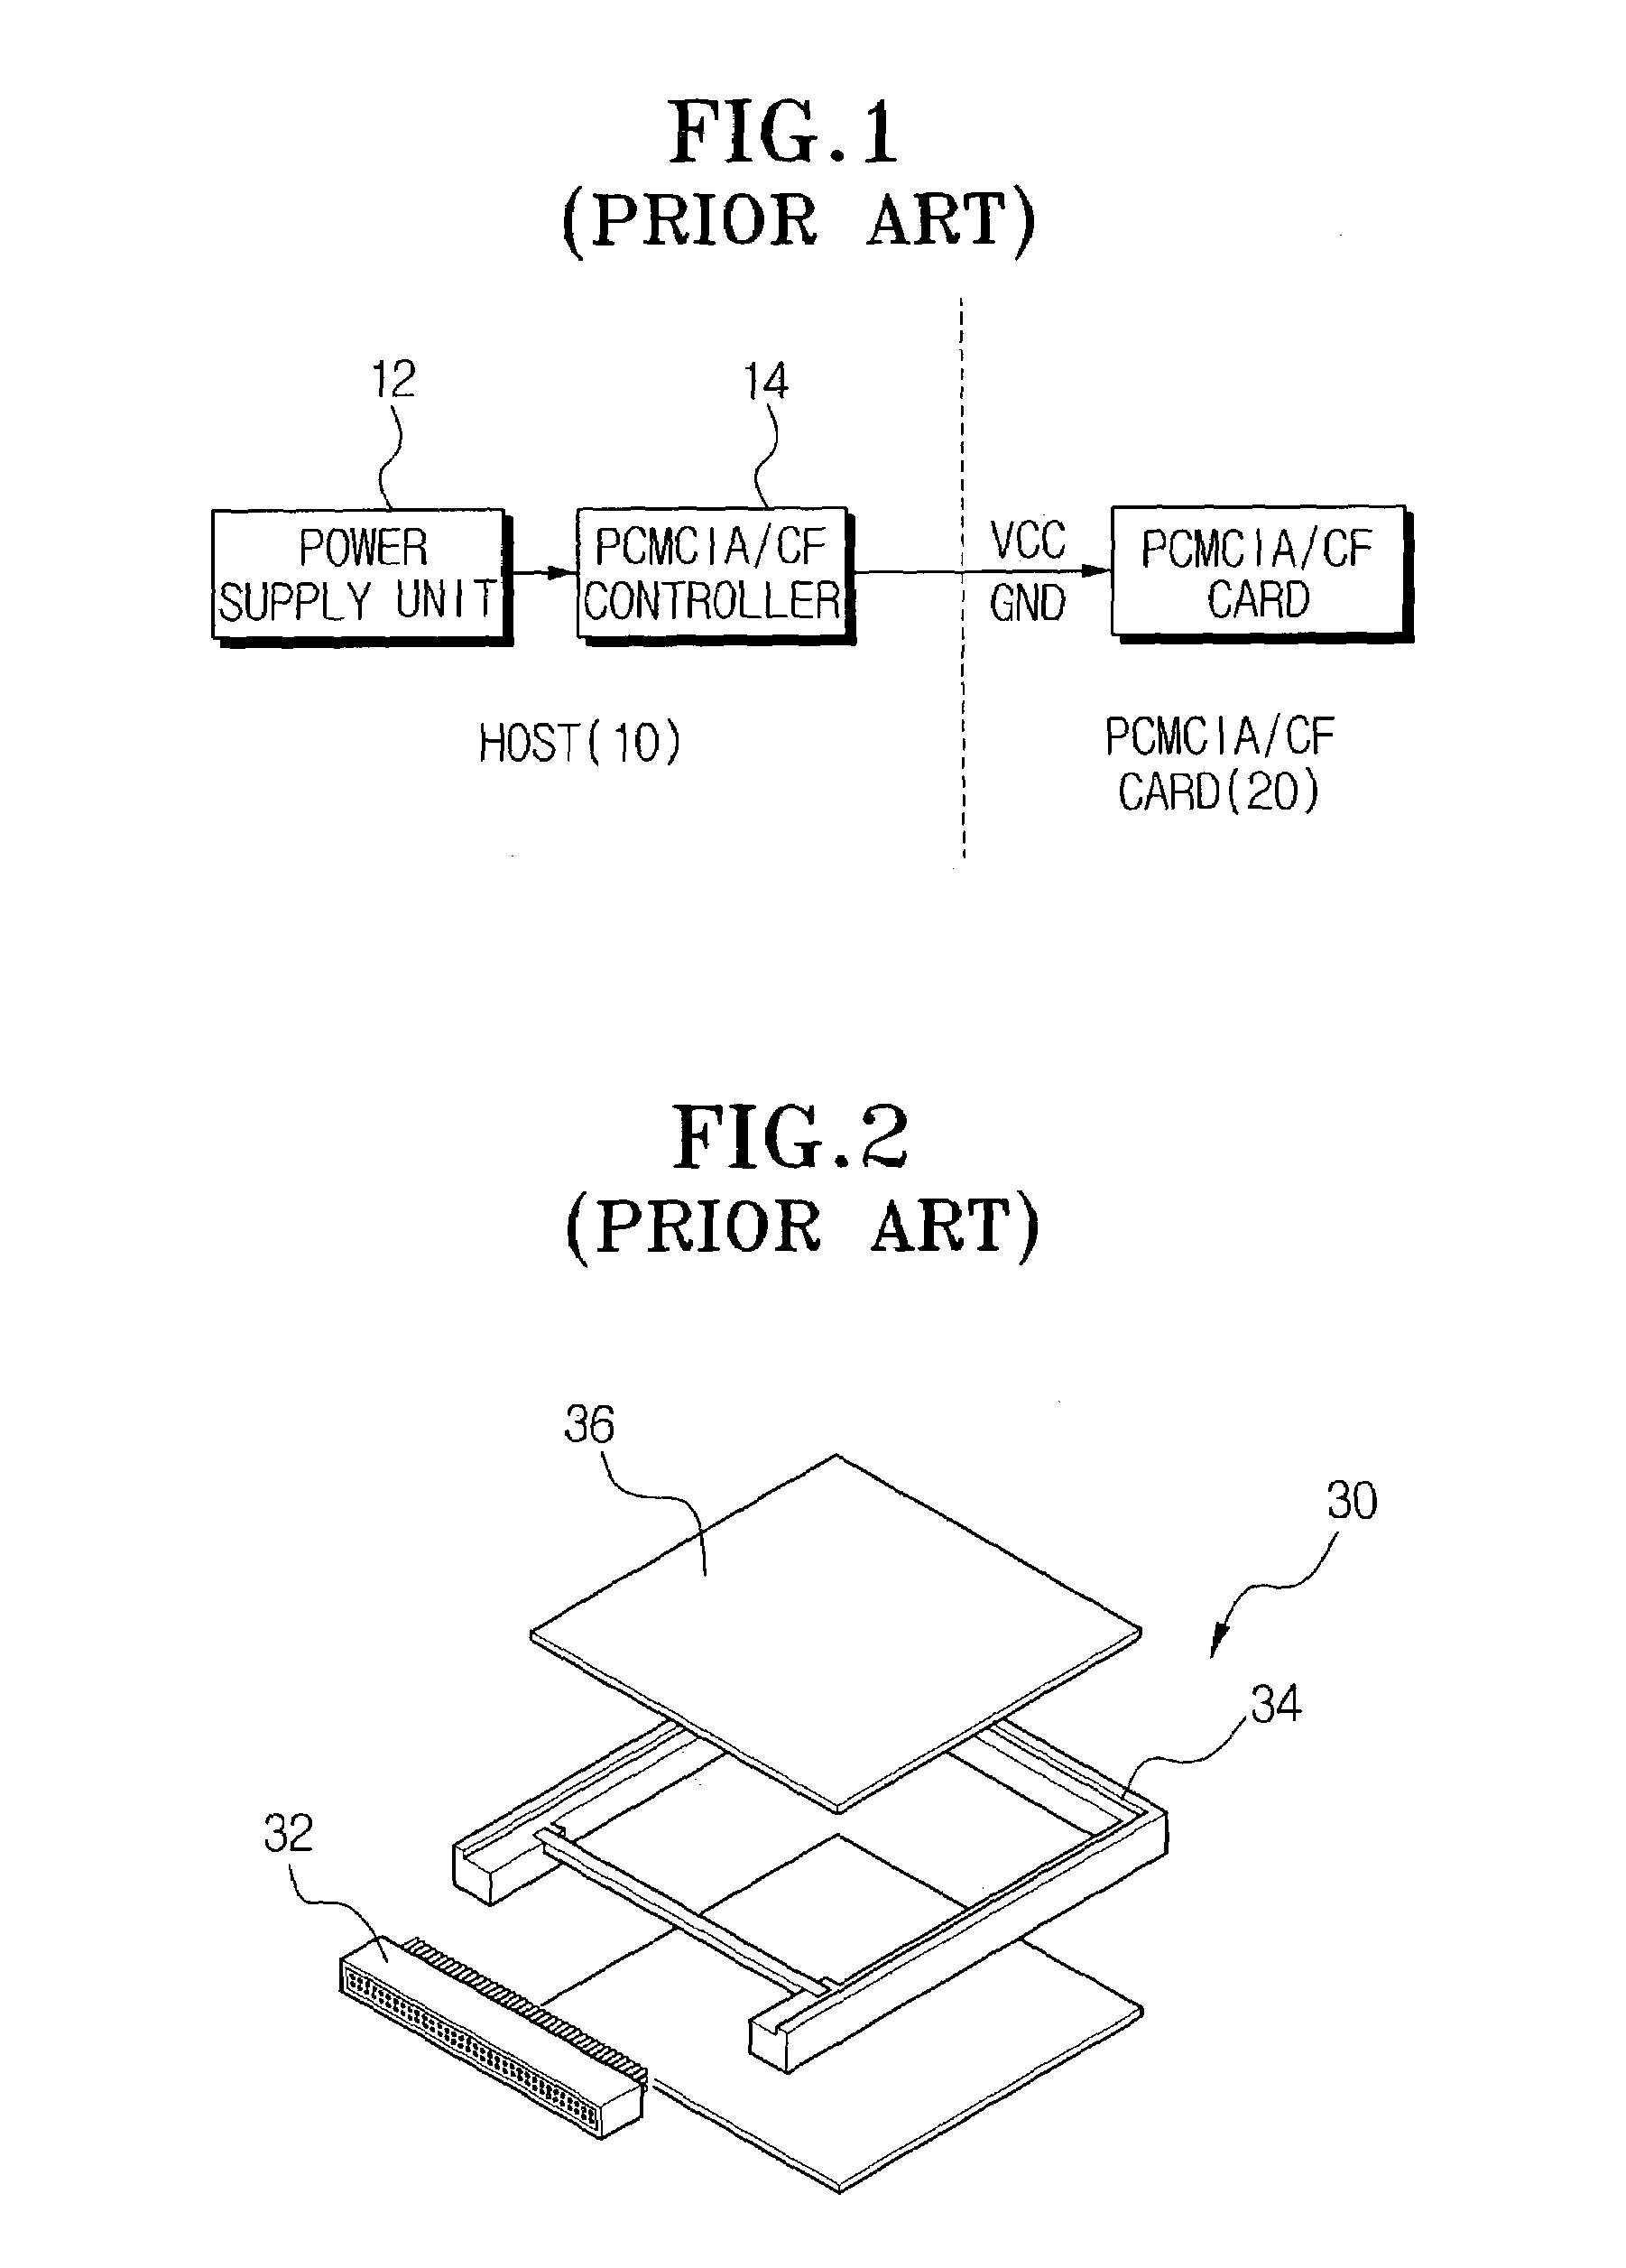 Card type device serving as supplementary battery and host using the same